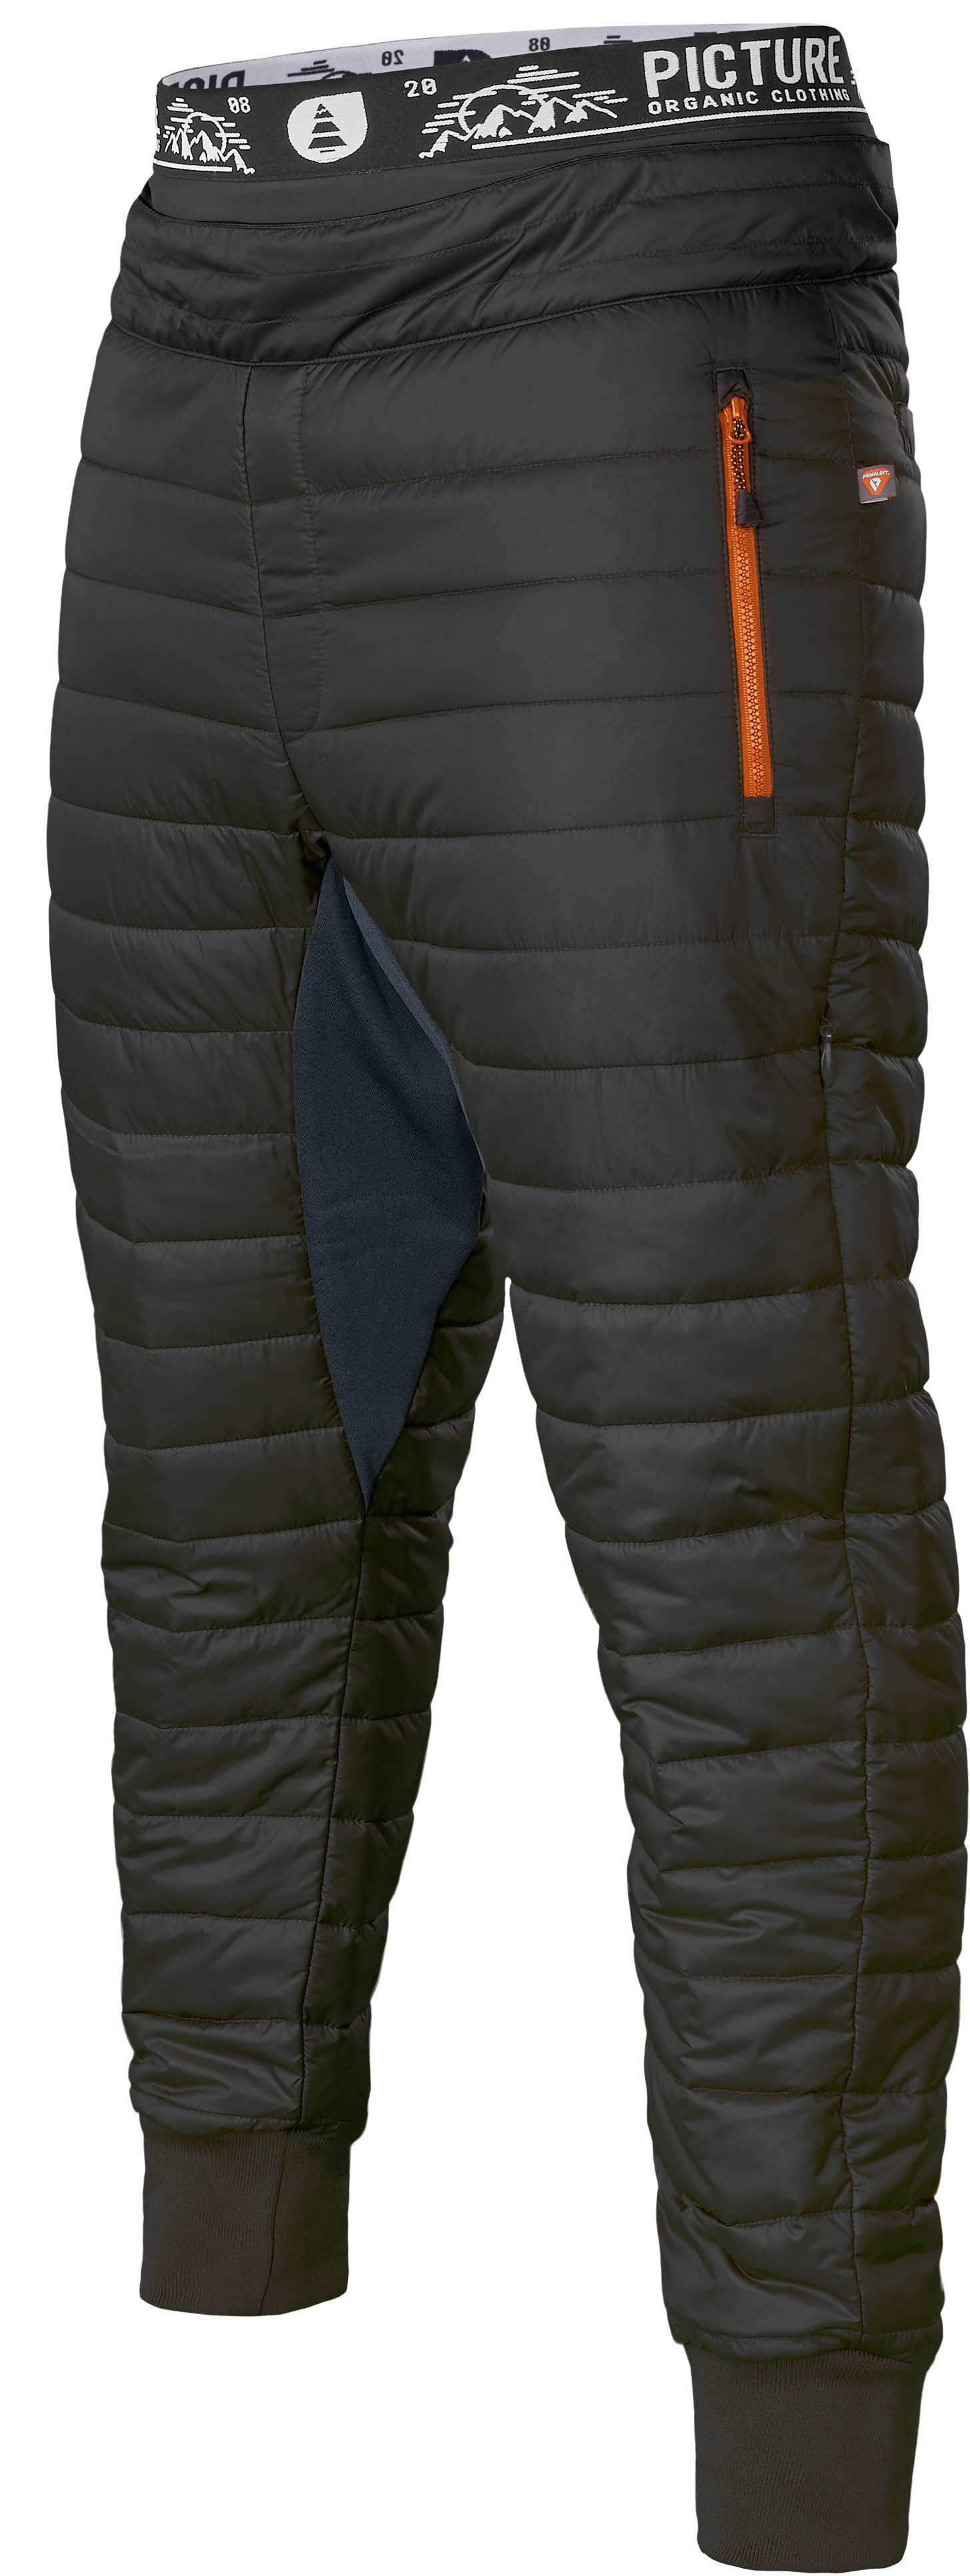 Picture Mitty Ski/Snowboard Mid Layer Pant | Absolute-Snow